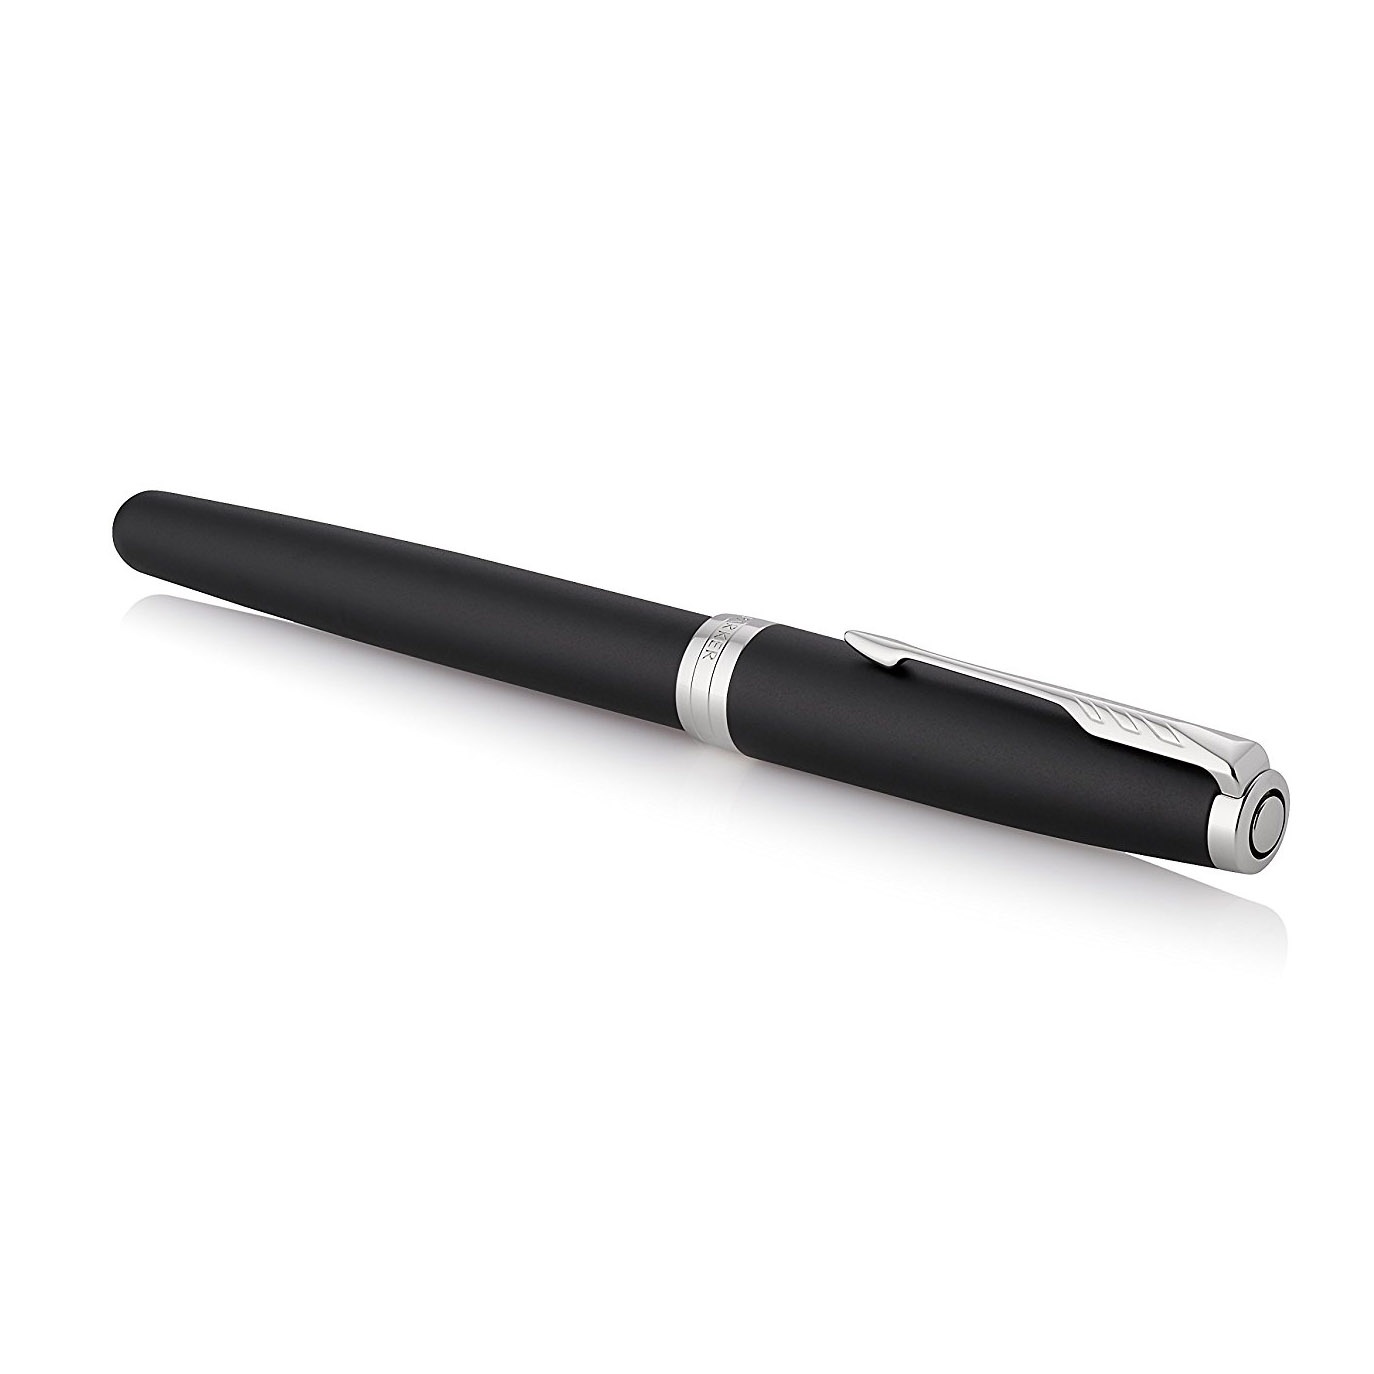 Sonnet Black/Chrome Fountain pen in the group Pens / Fine Writing / Fountain Pens at Voorcrea (104803)